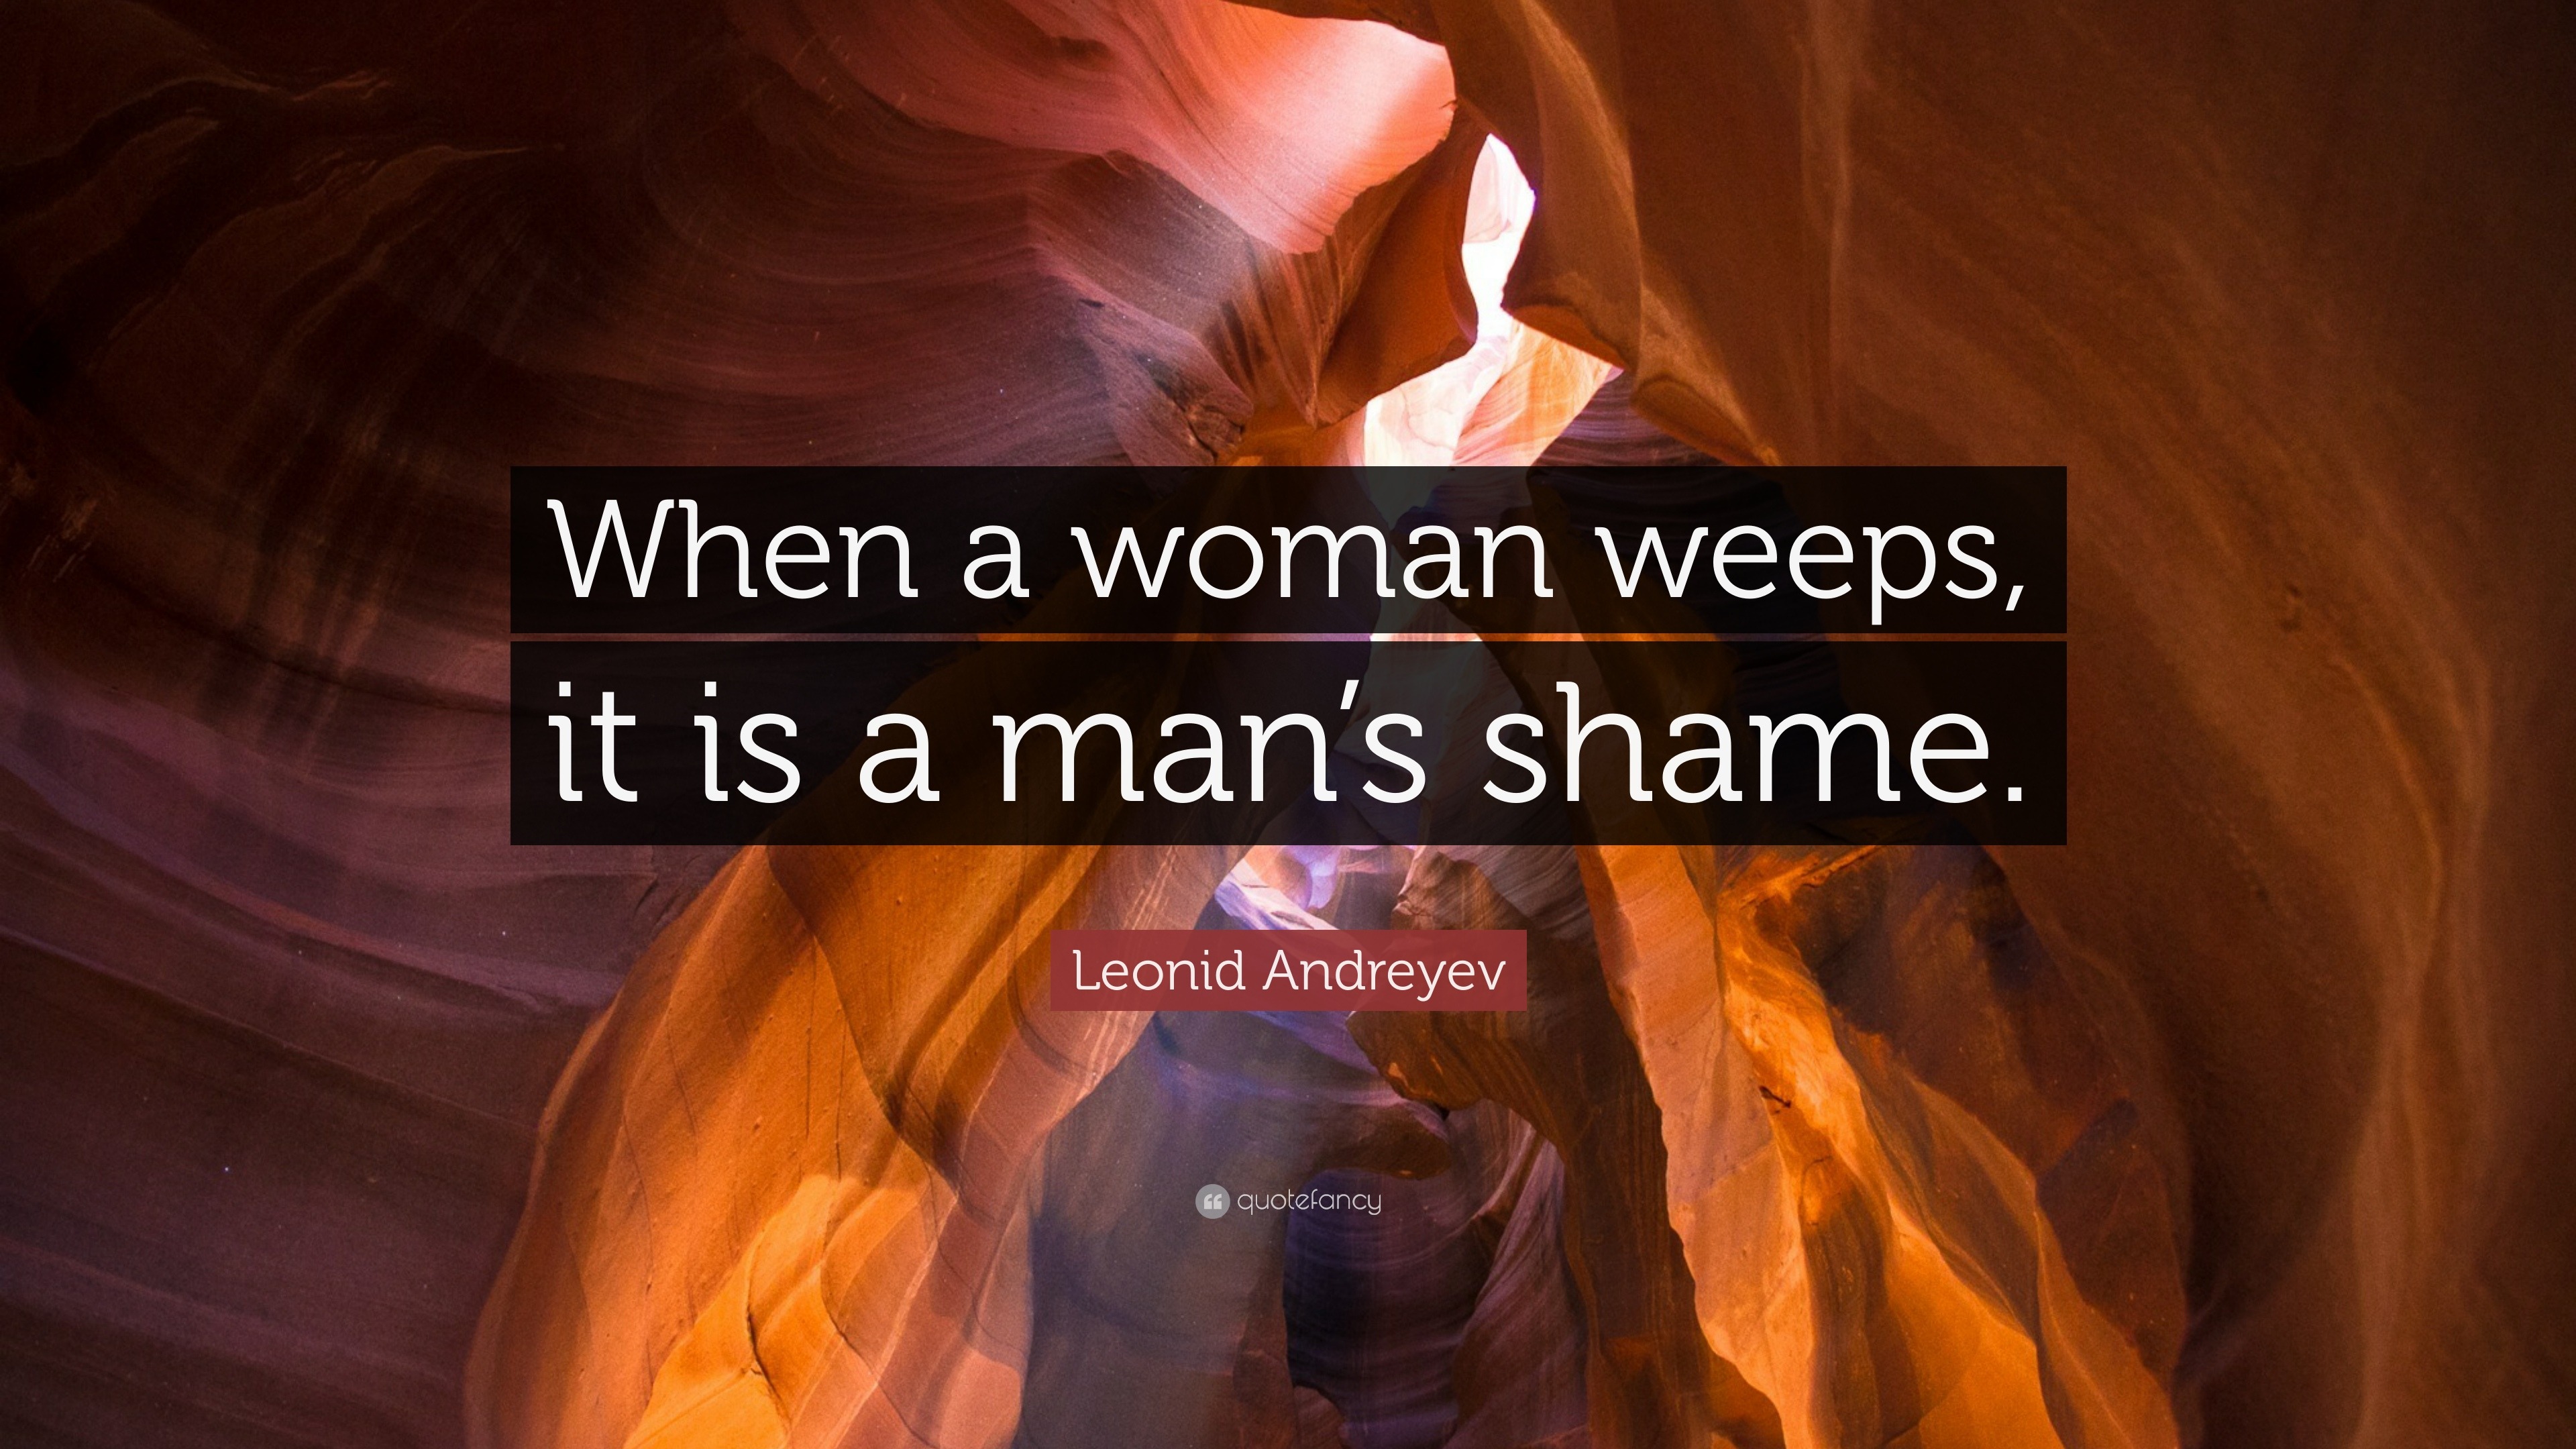 Leonid Andreyev Quote: “When a woman weeps, it is a man's shame.”